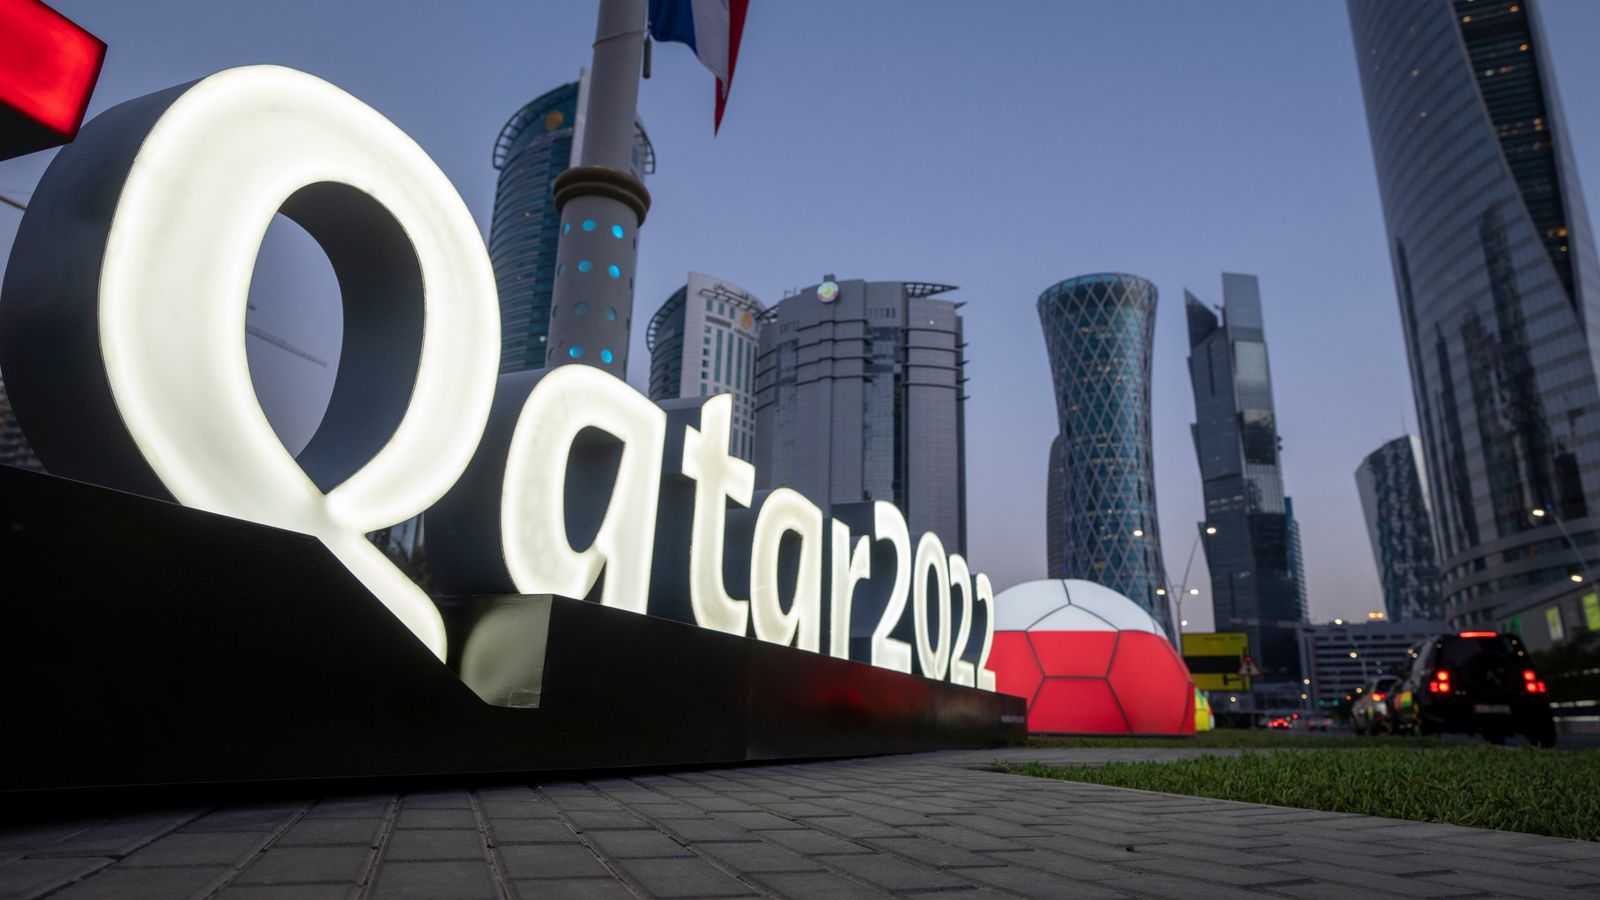 Qatar official says homosexuality is ‘damage in the mind’ before World Cup kicks off